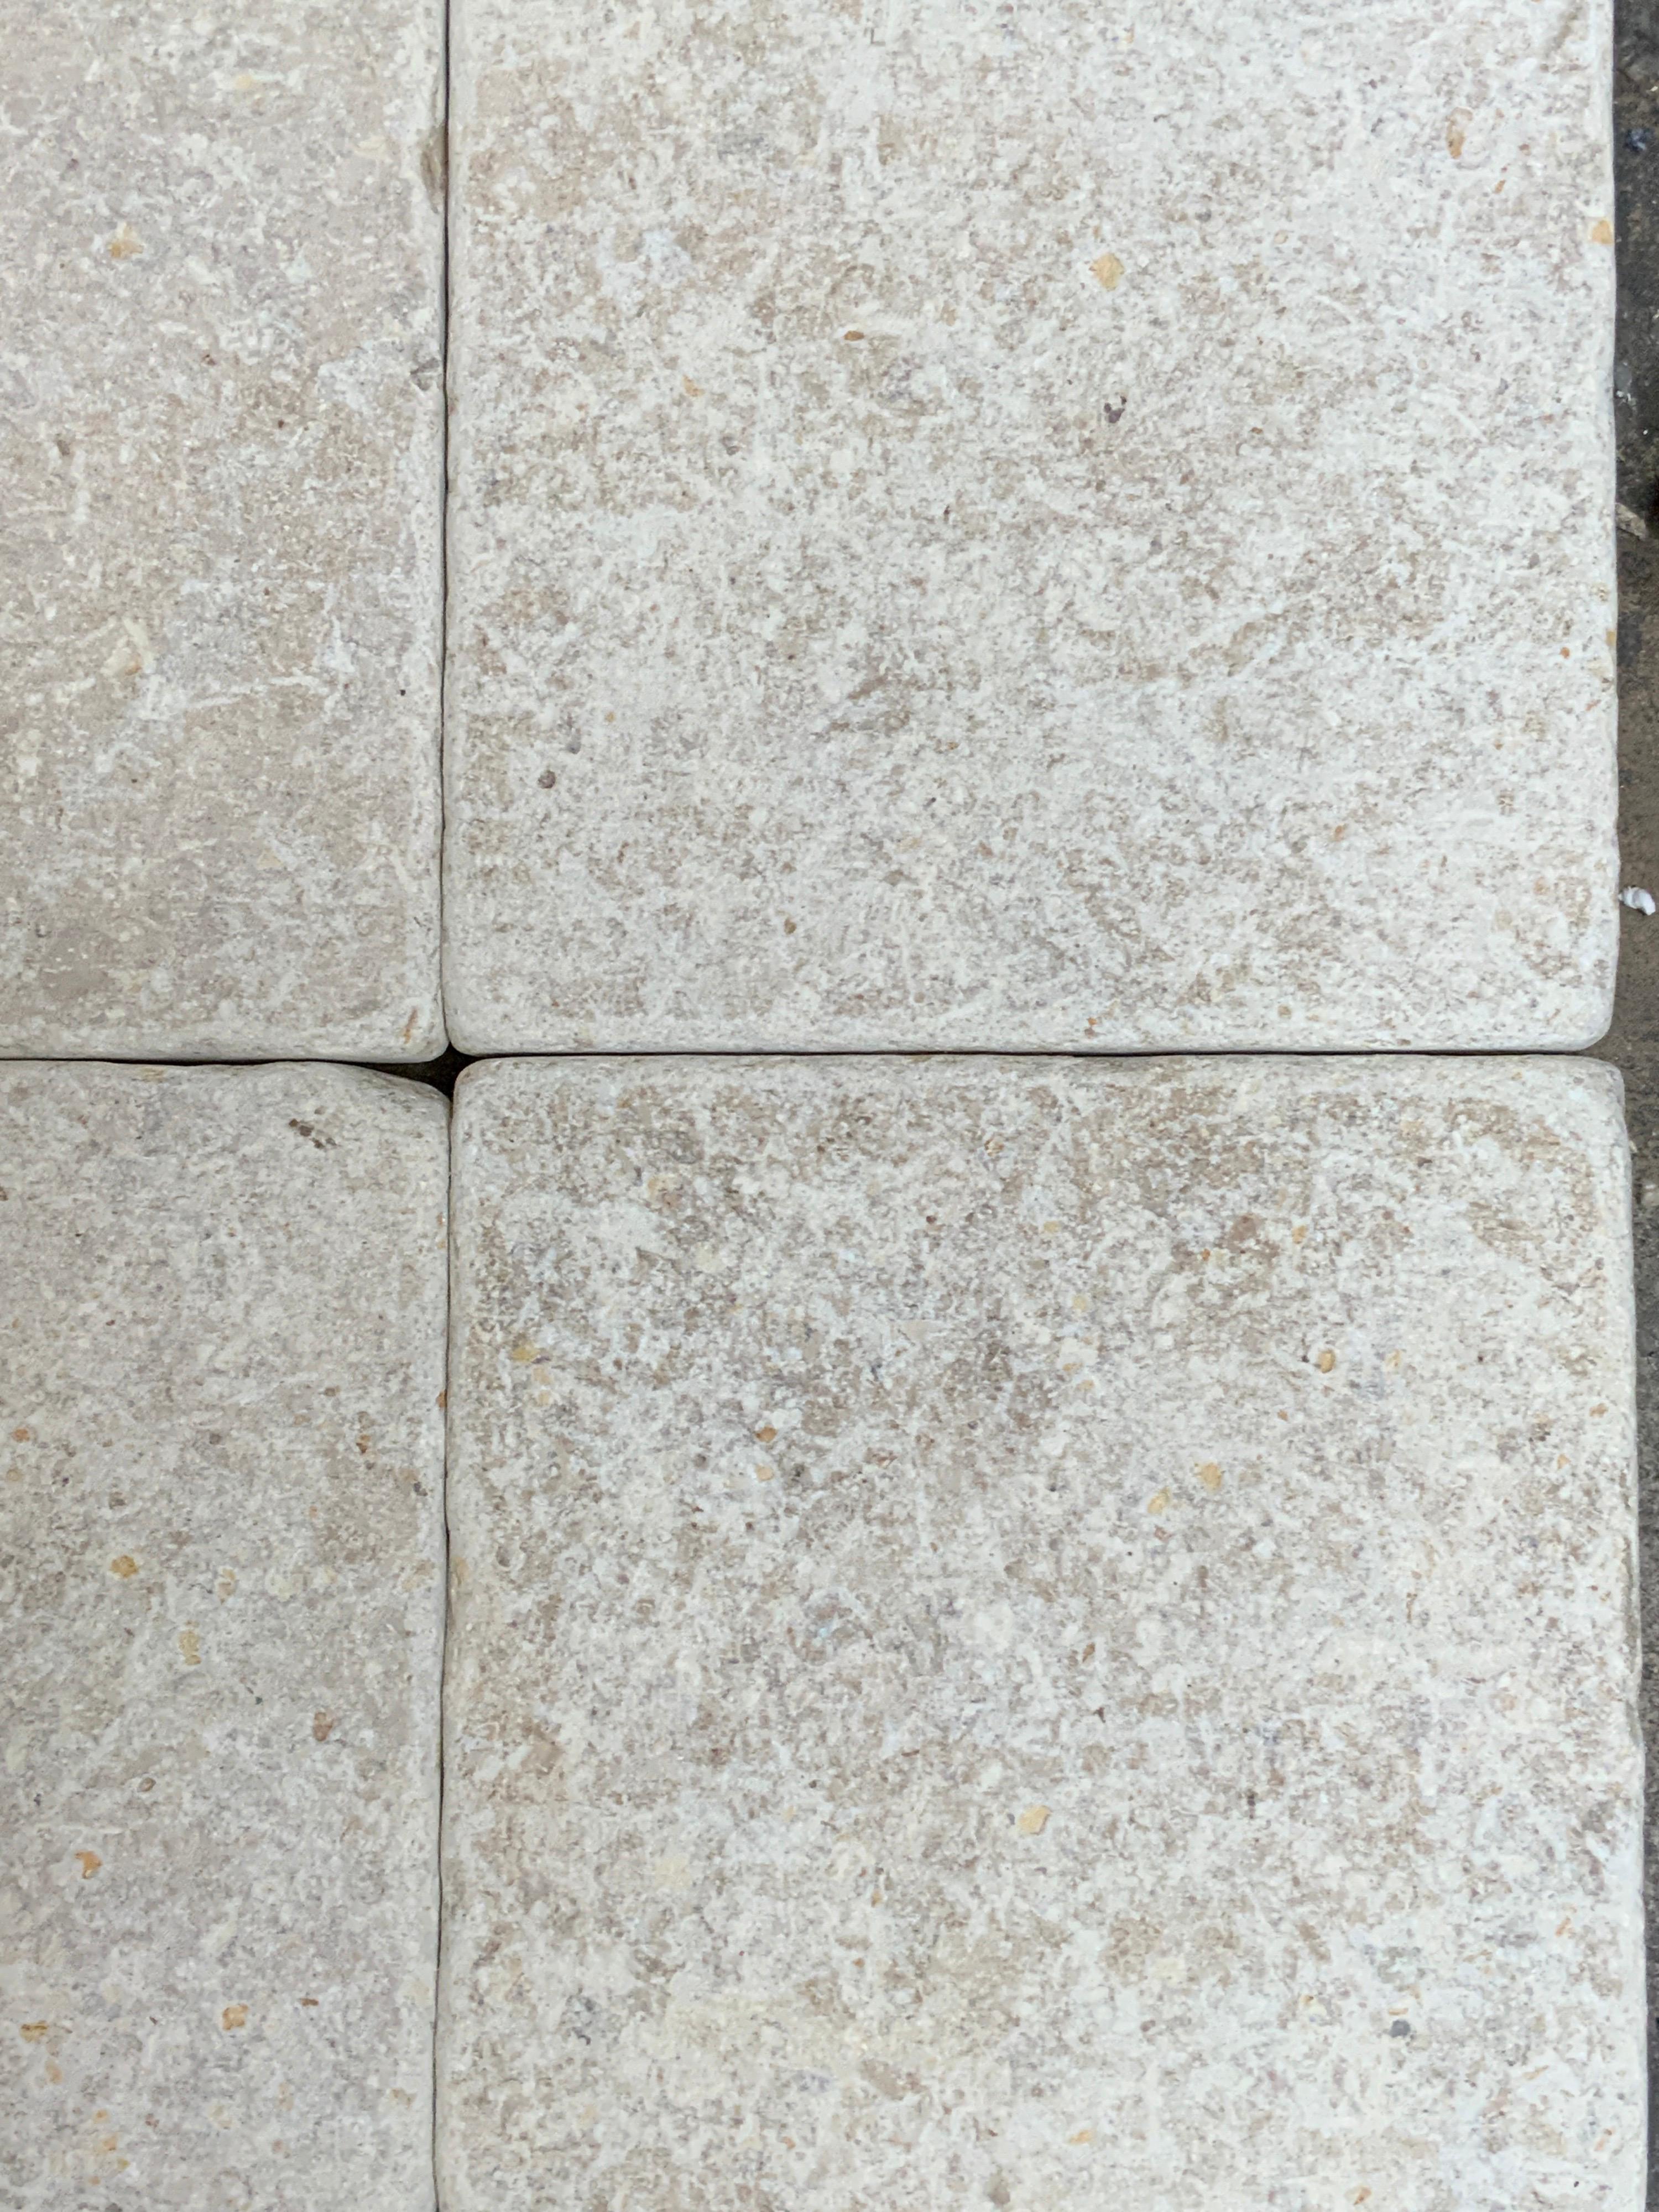 Gorgeous limestone pavers measuring 6 x 6in. These tiles are imported from Europe and can be used for a variety of floors.